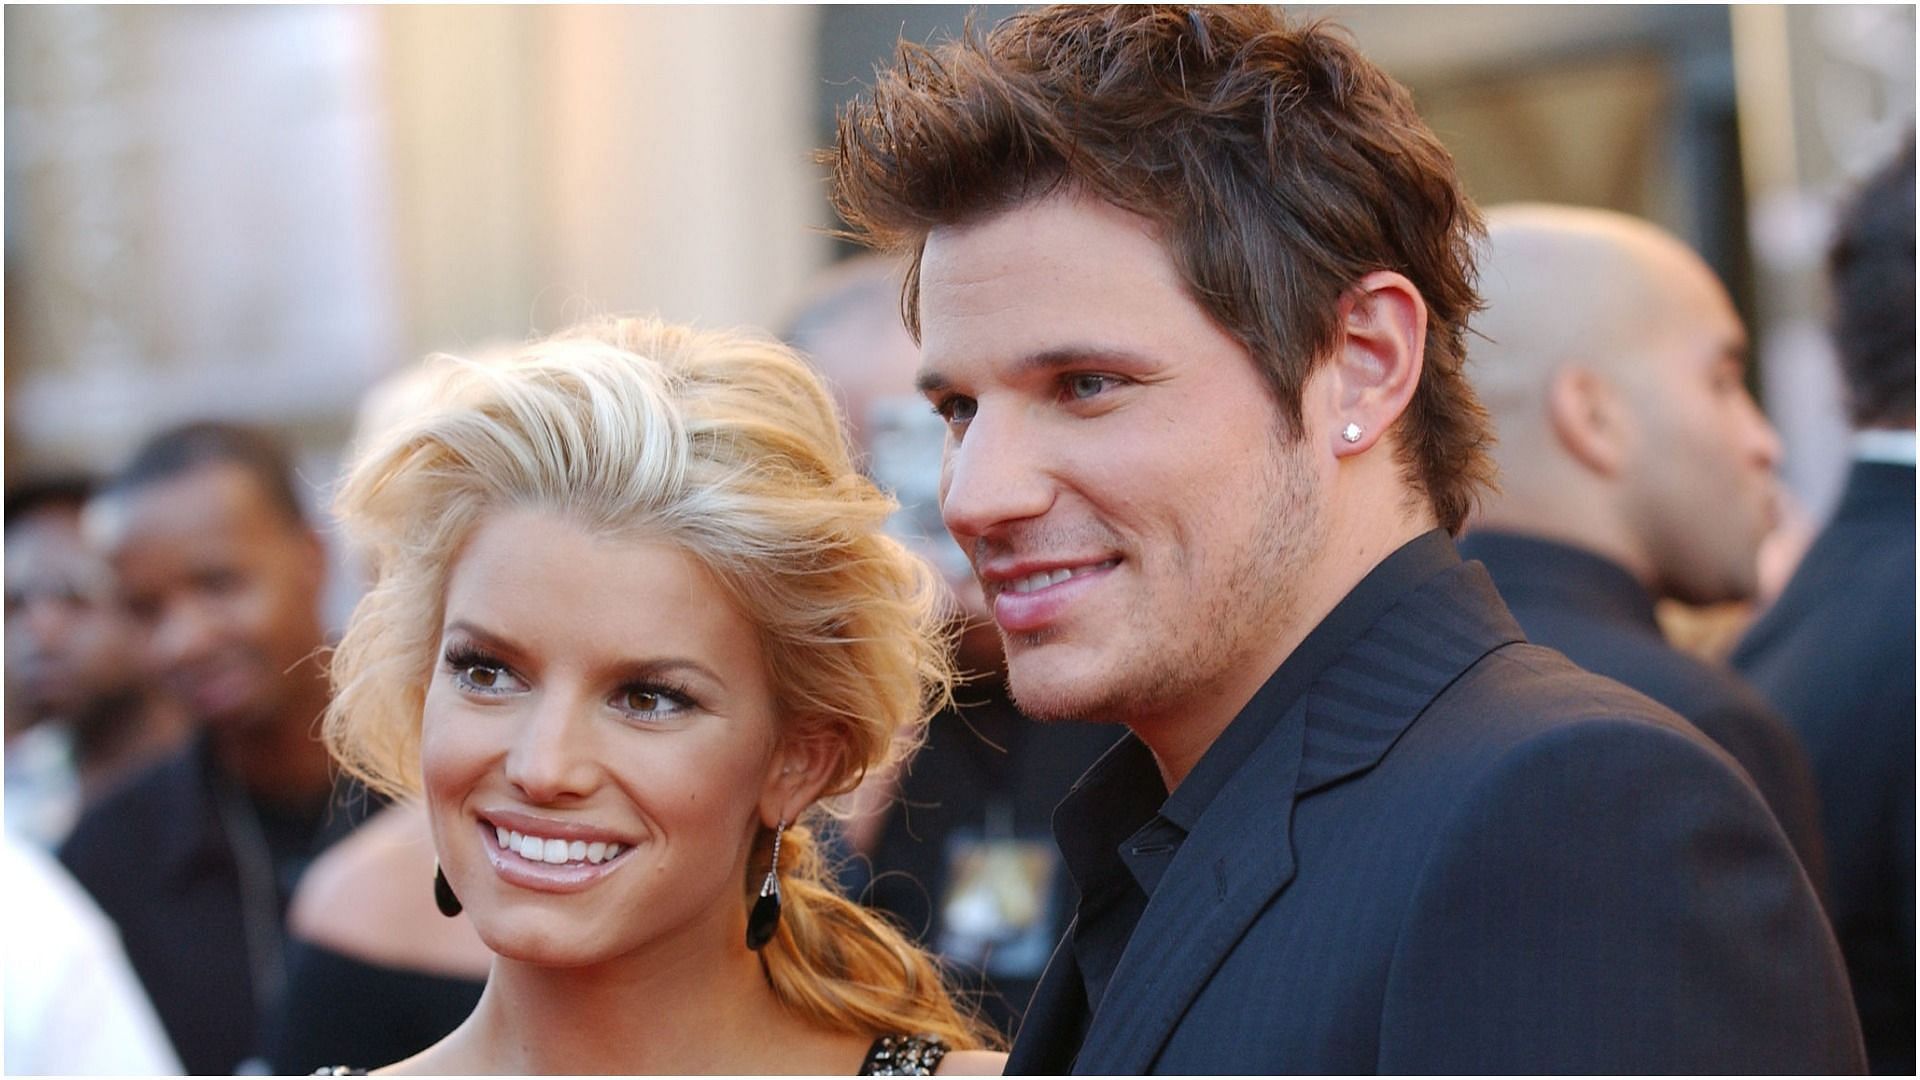 Jessica Simpson and husband Nick Lachey during 32nd Annual American Music Awards (Image via Getty Images)